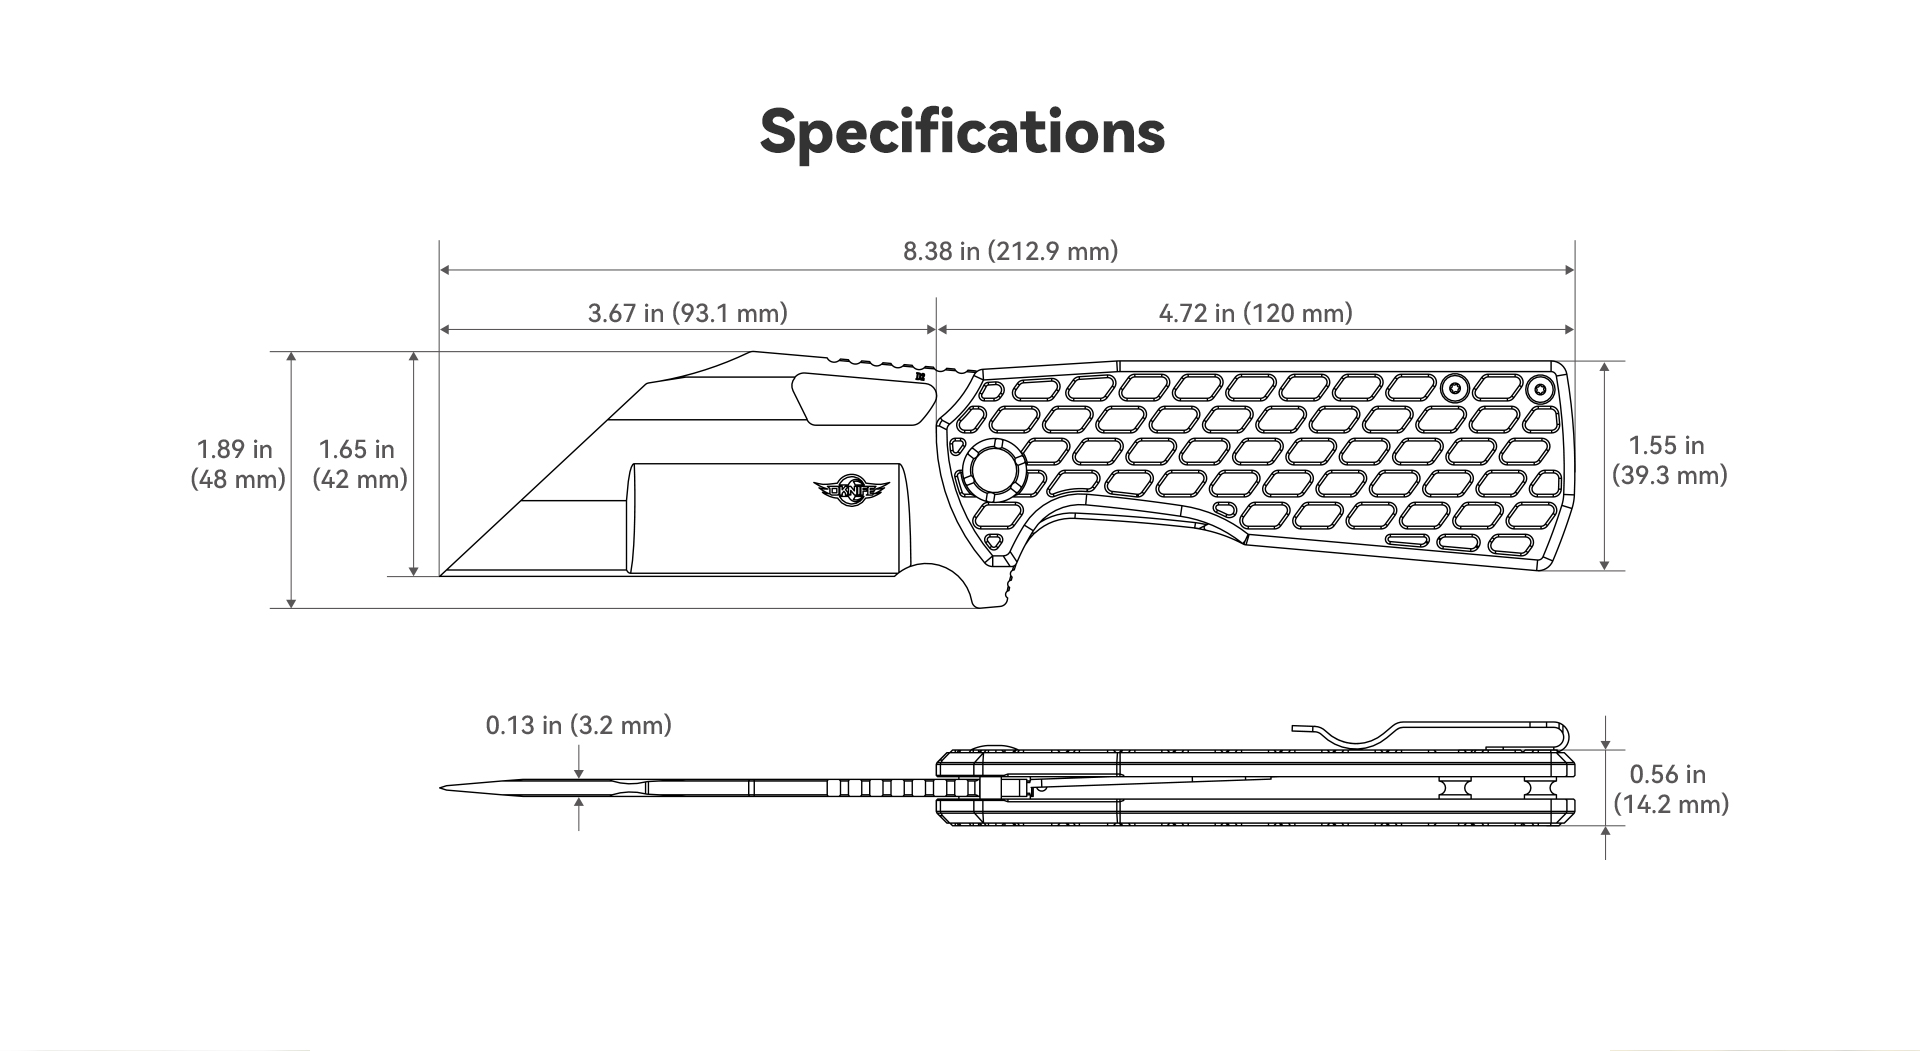 This image shows the dimensions of the Oknife Heron L1 folding knife.